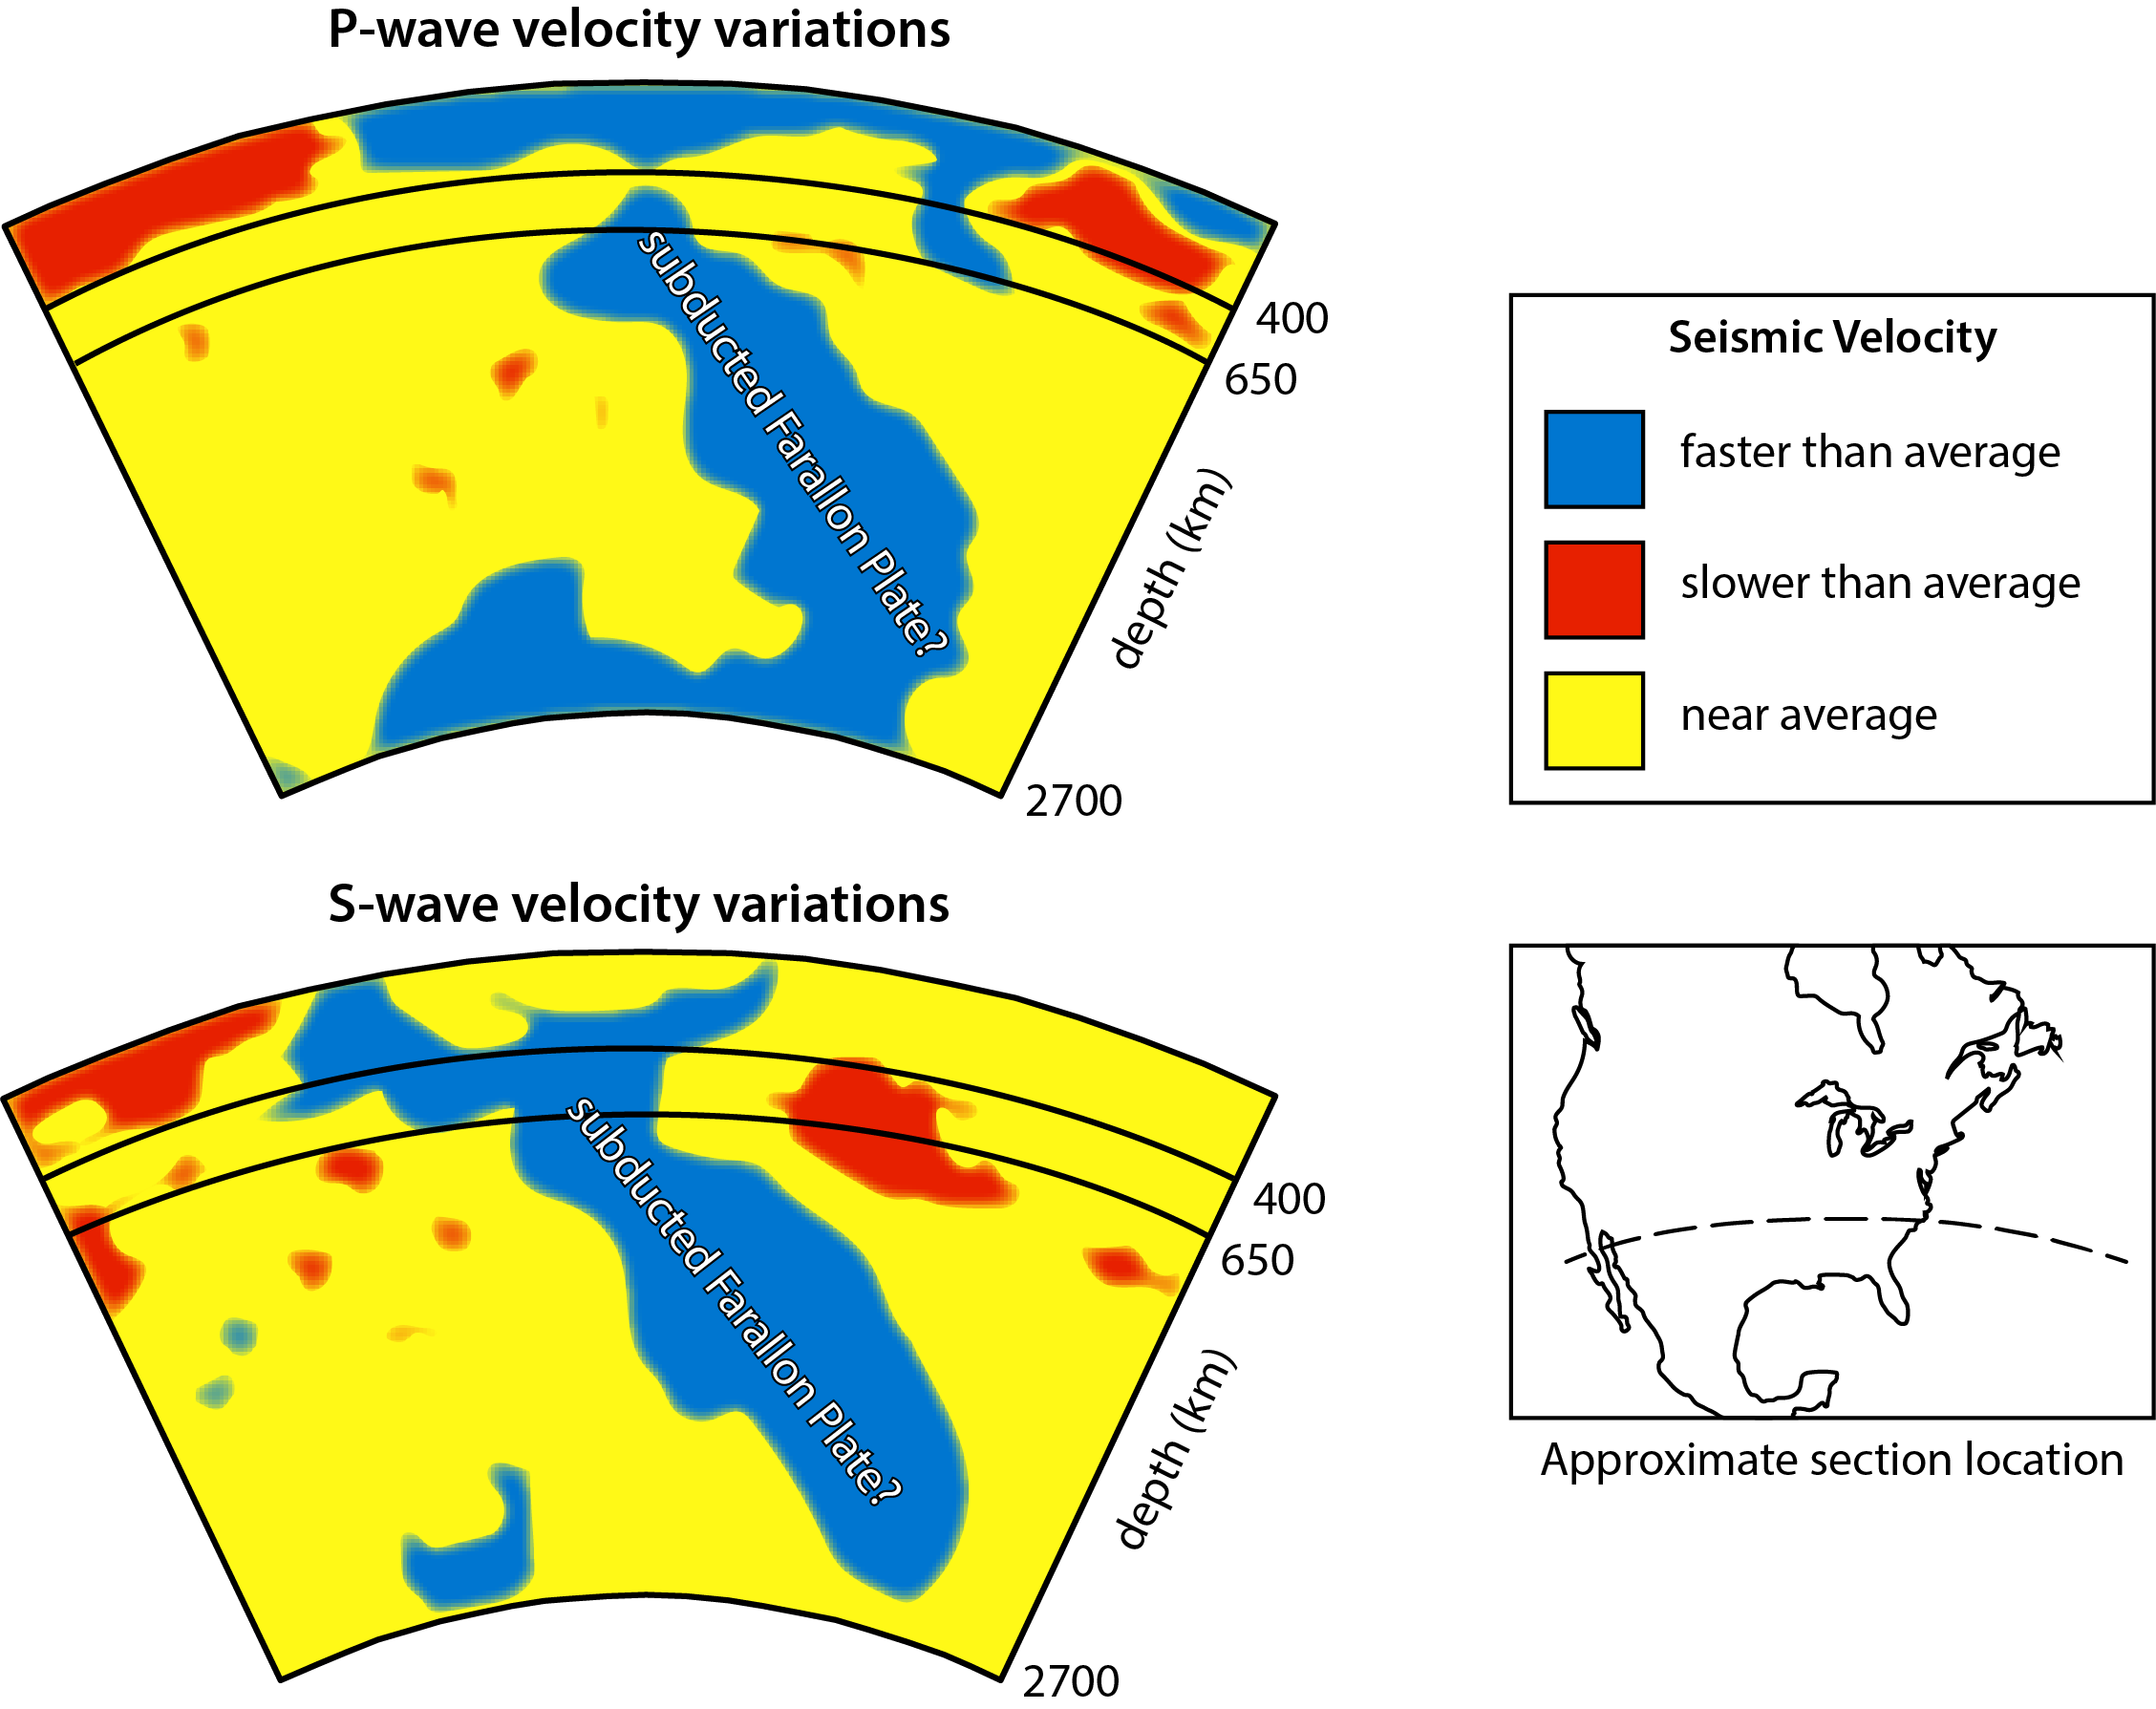 Heat map of P- and S-wave velocity variations. Fast velocity identified as the subducted Farallon plate